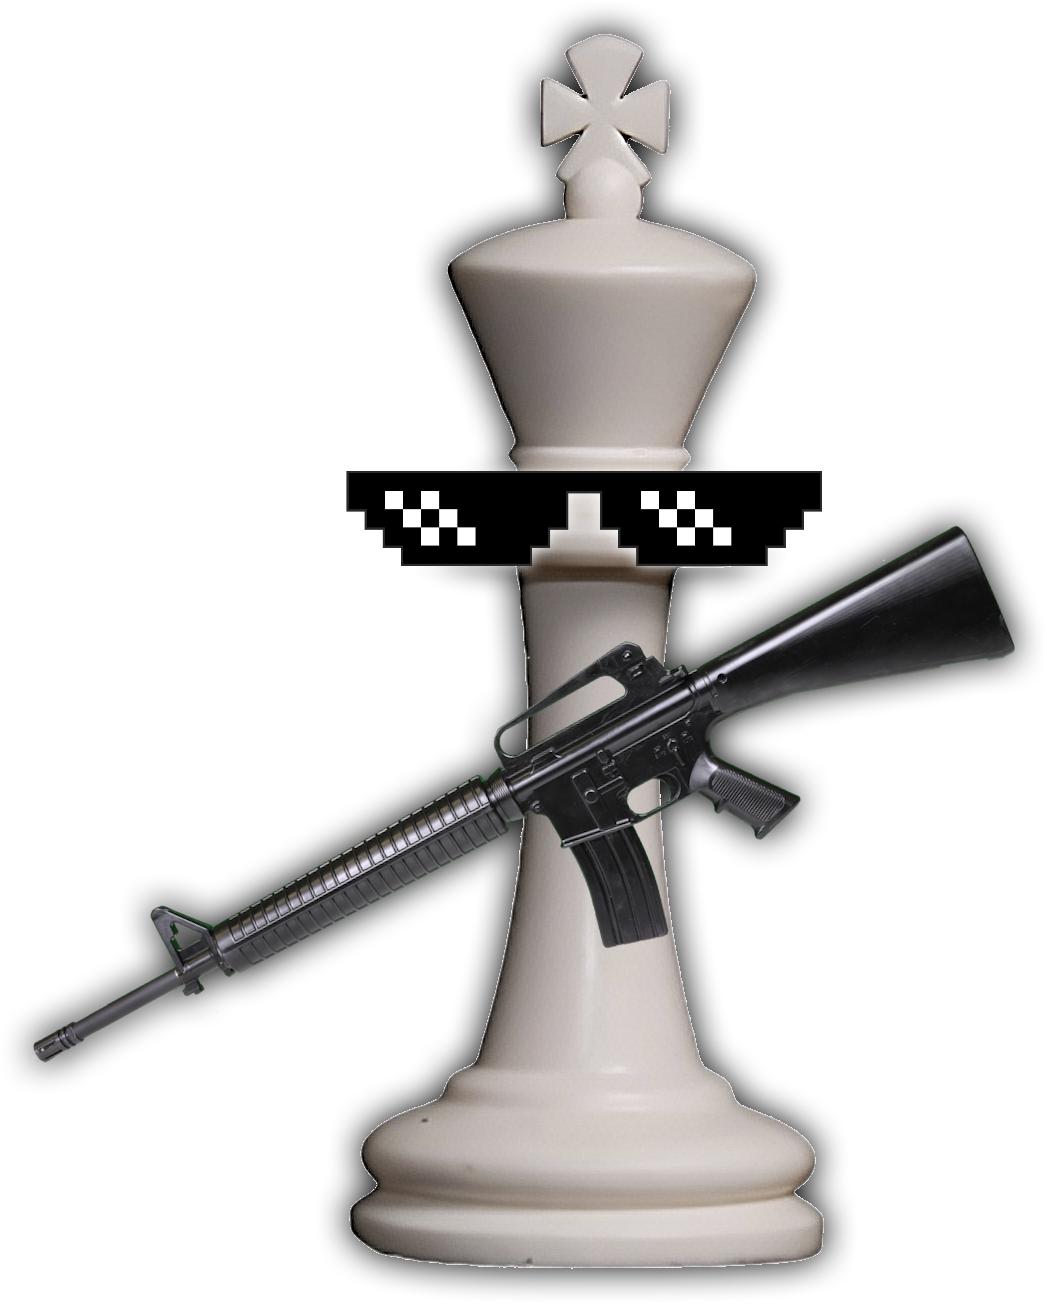 Chess piece with a4m1 or something